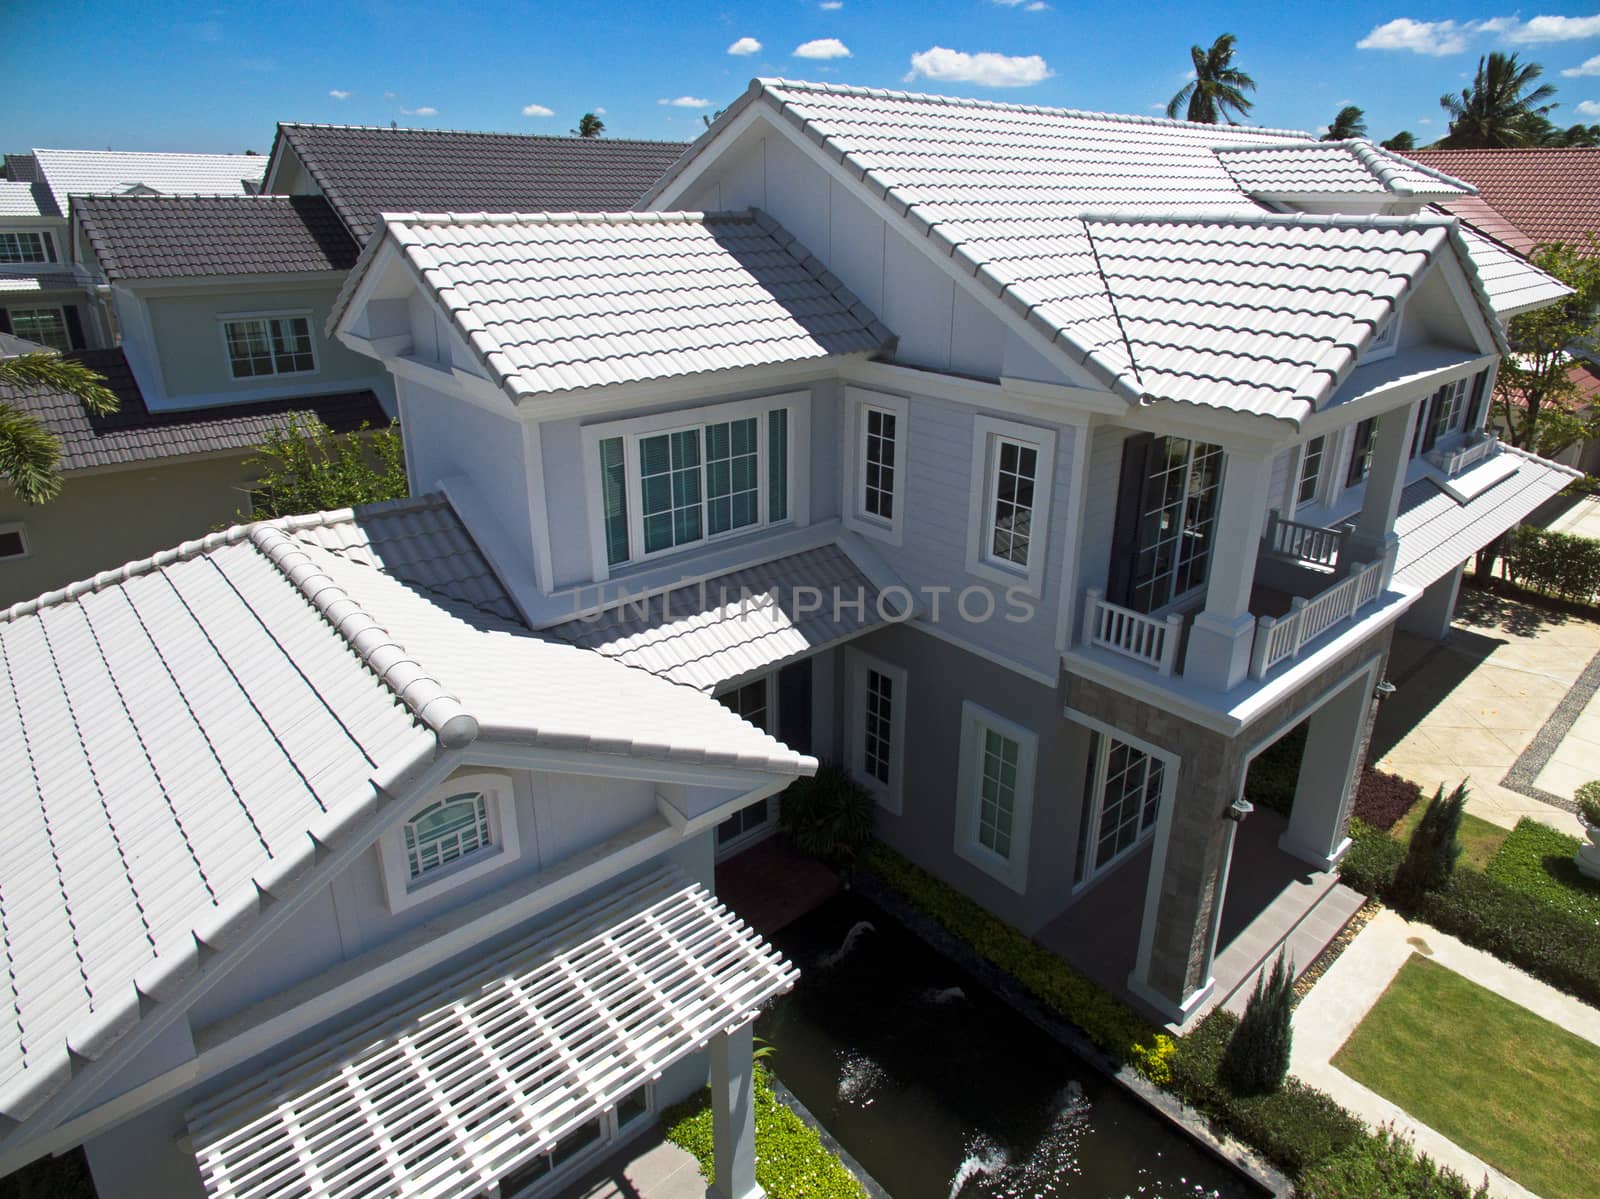 House Roofs tiles, new styles and colors